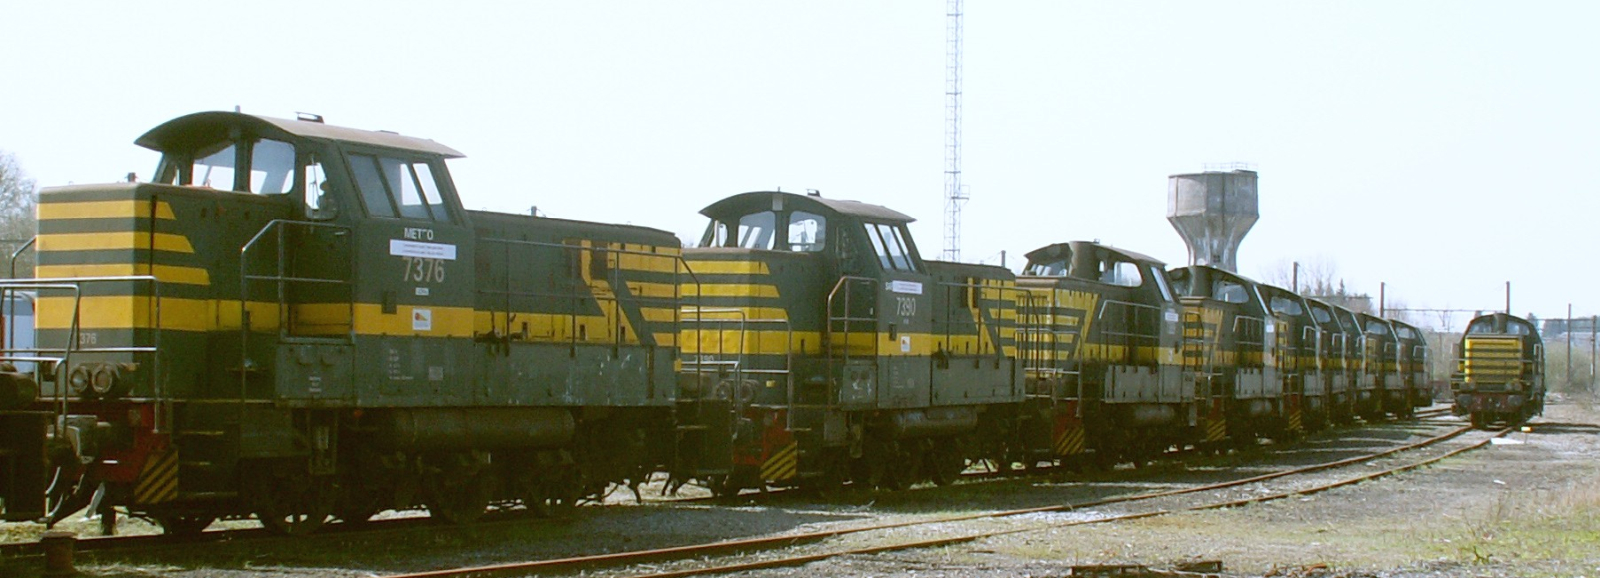 Some class 73 locomotives after being retired in April 2010 at the Stockem works